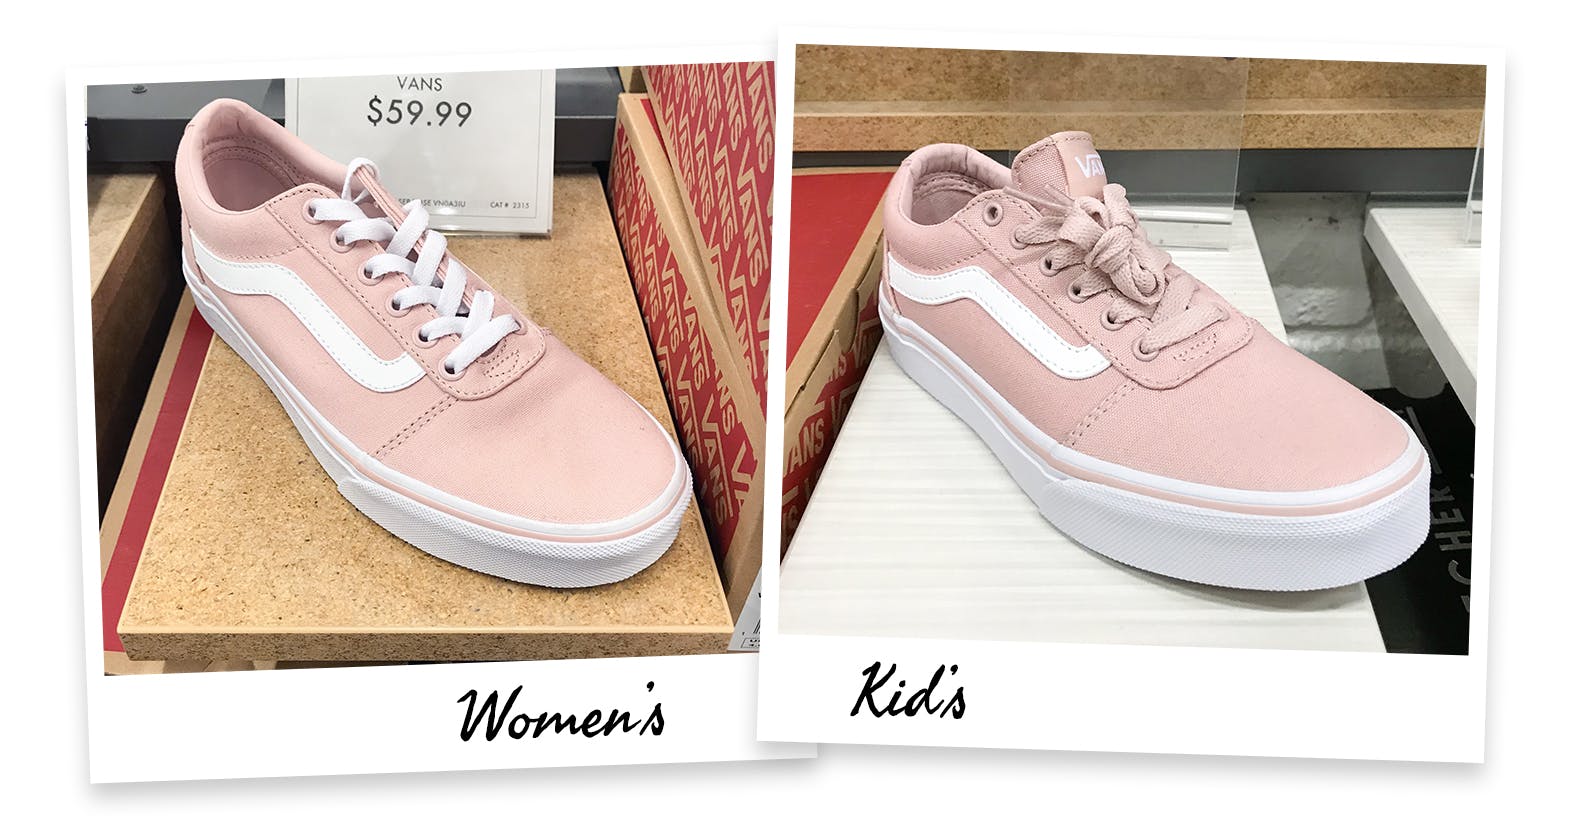 womens size 8 equals children's shoes